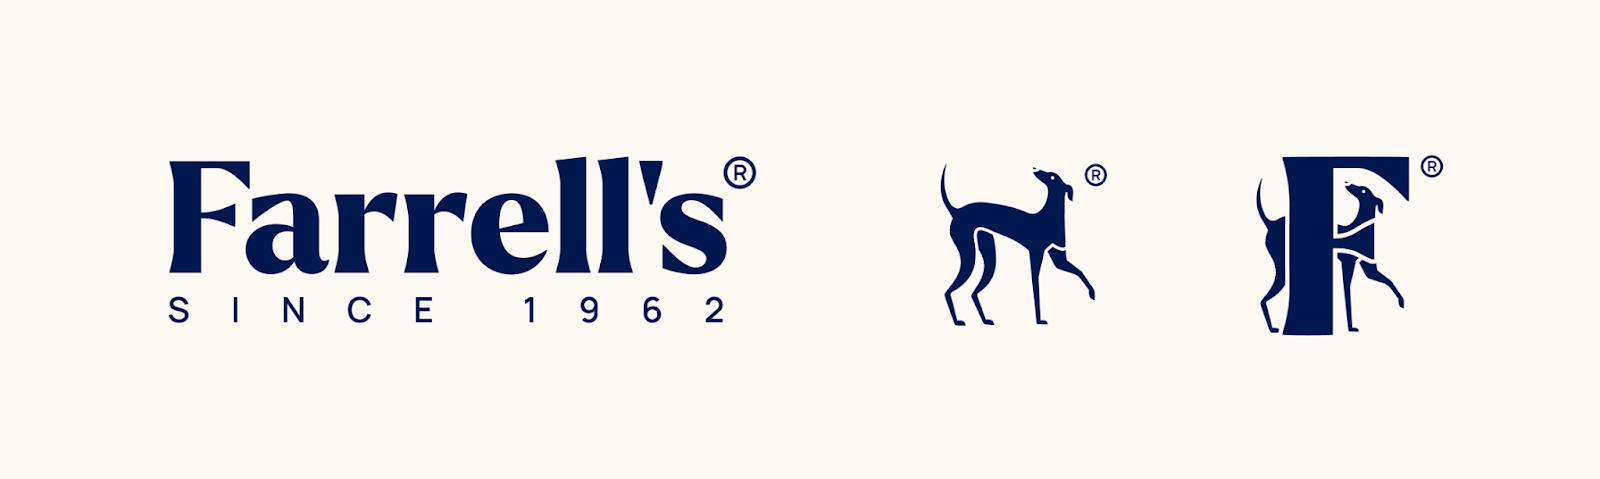 Screenshot of three Farrell's logo versions, one text logo and two illustration logos.